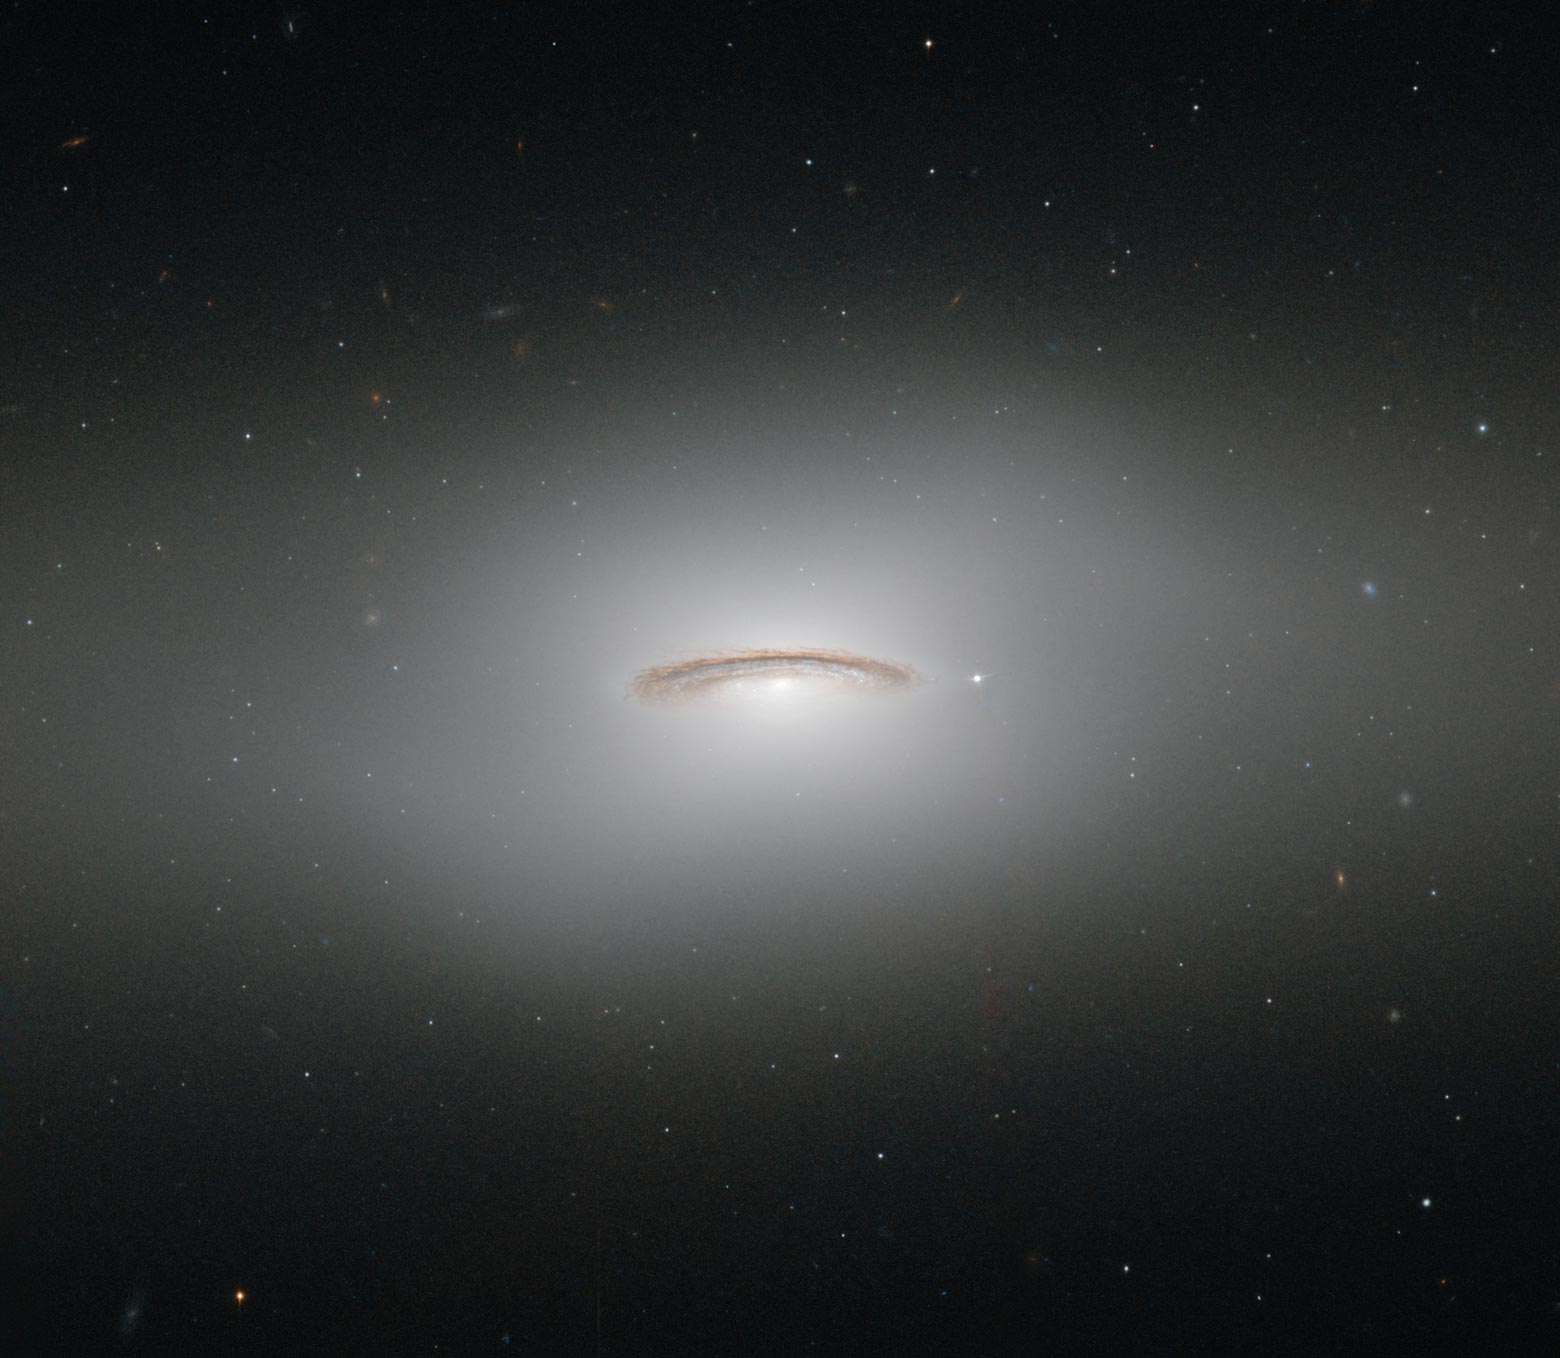 a colossal supermassive black hole is hiding in the center of NGC 4526 galaxy